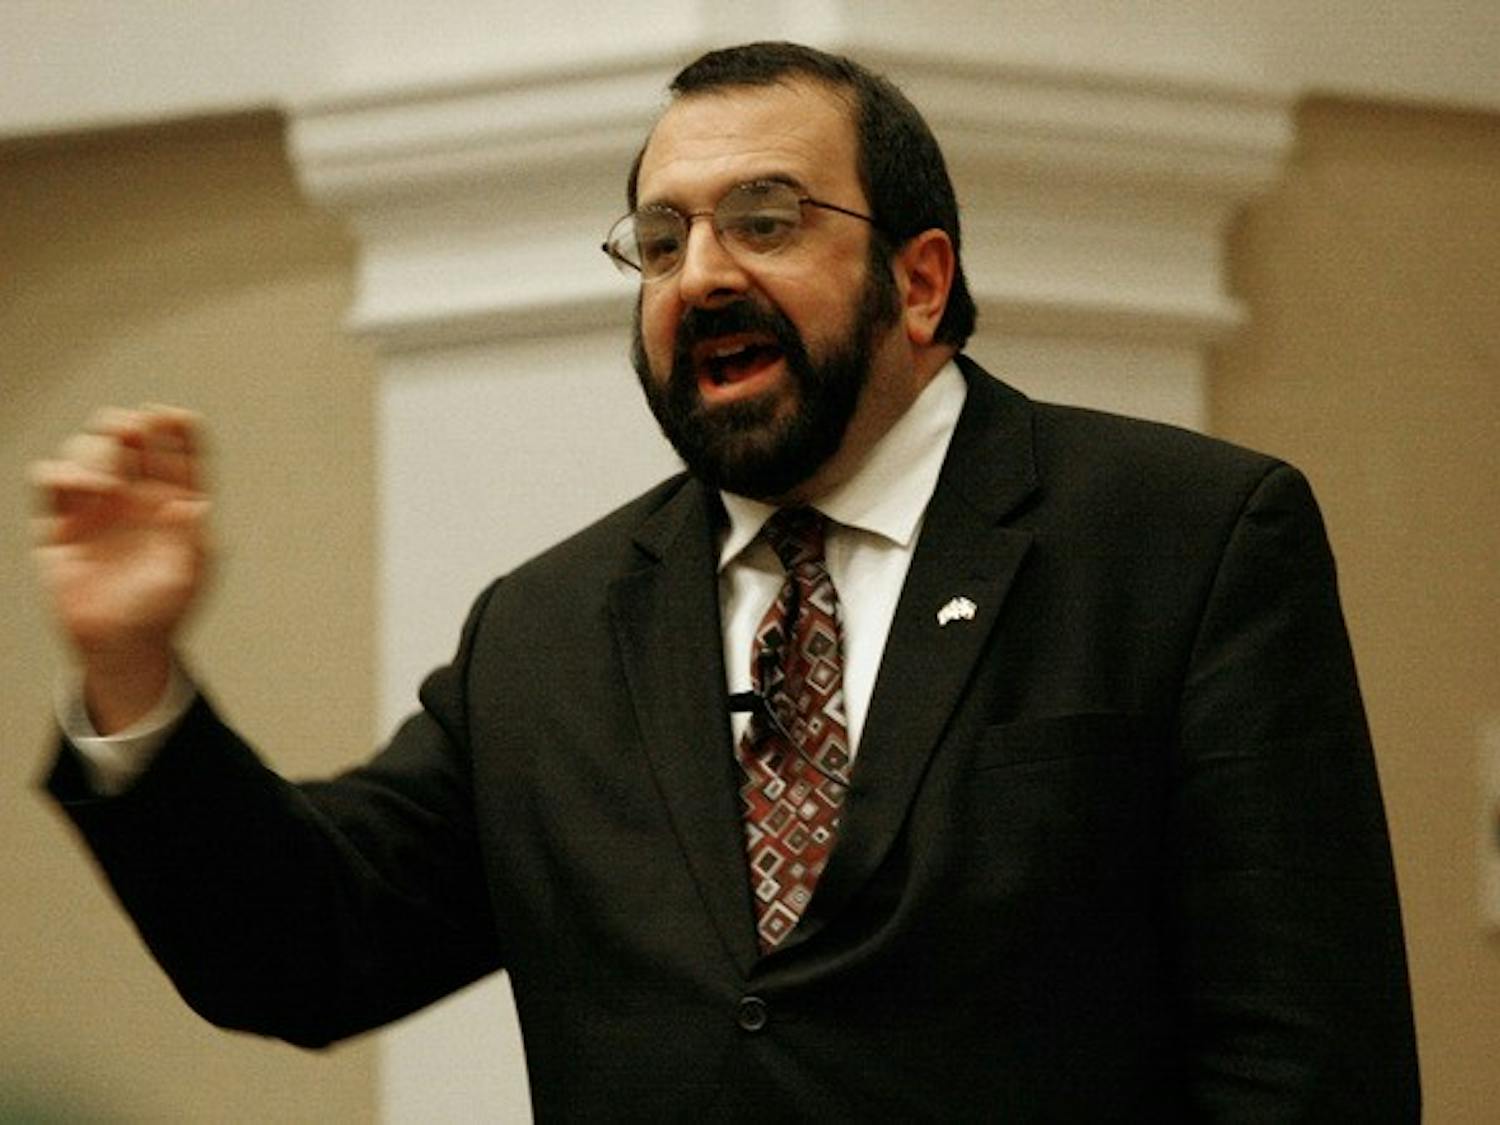 Robert Spencer, a key player in the organization of 